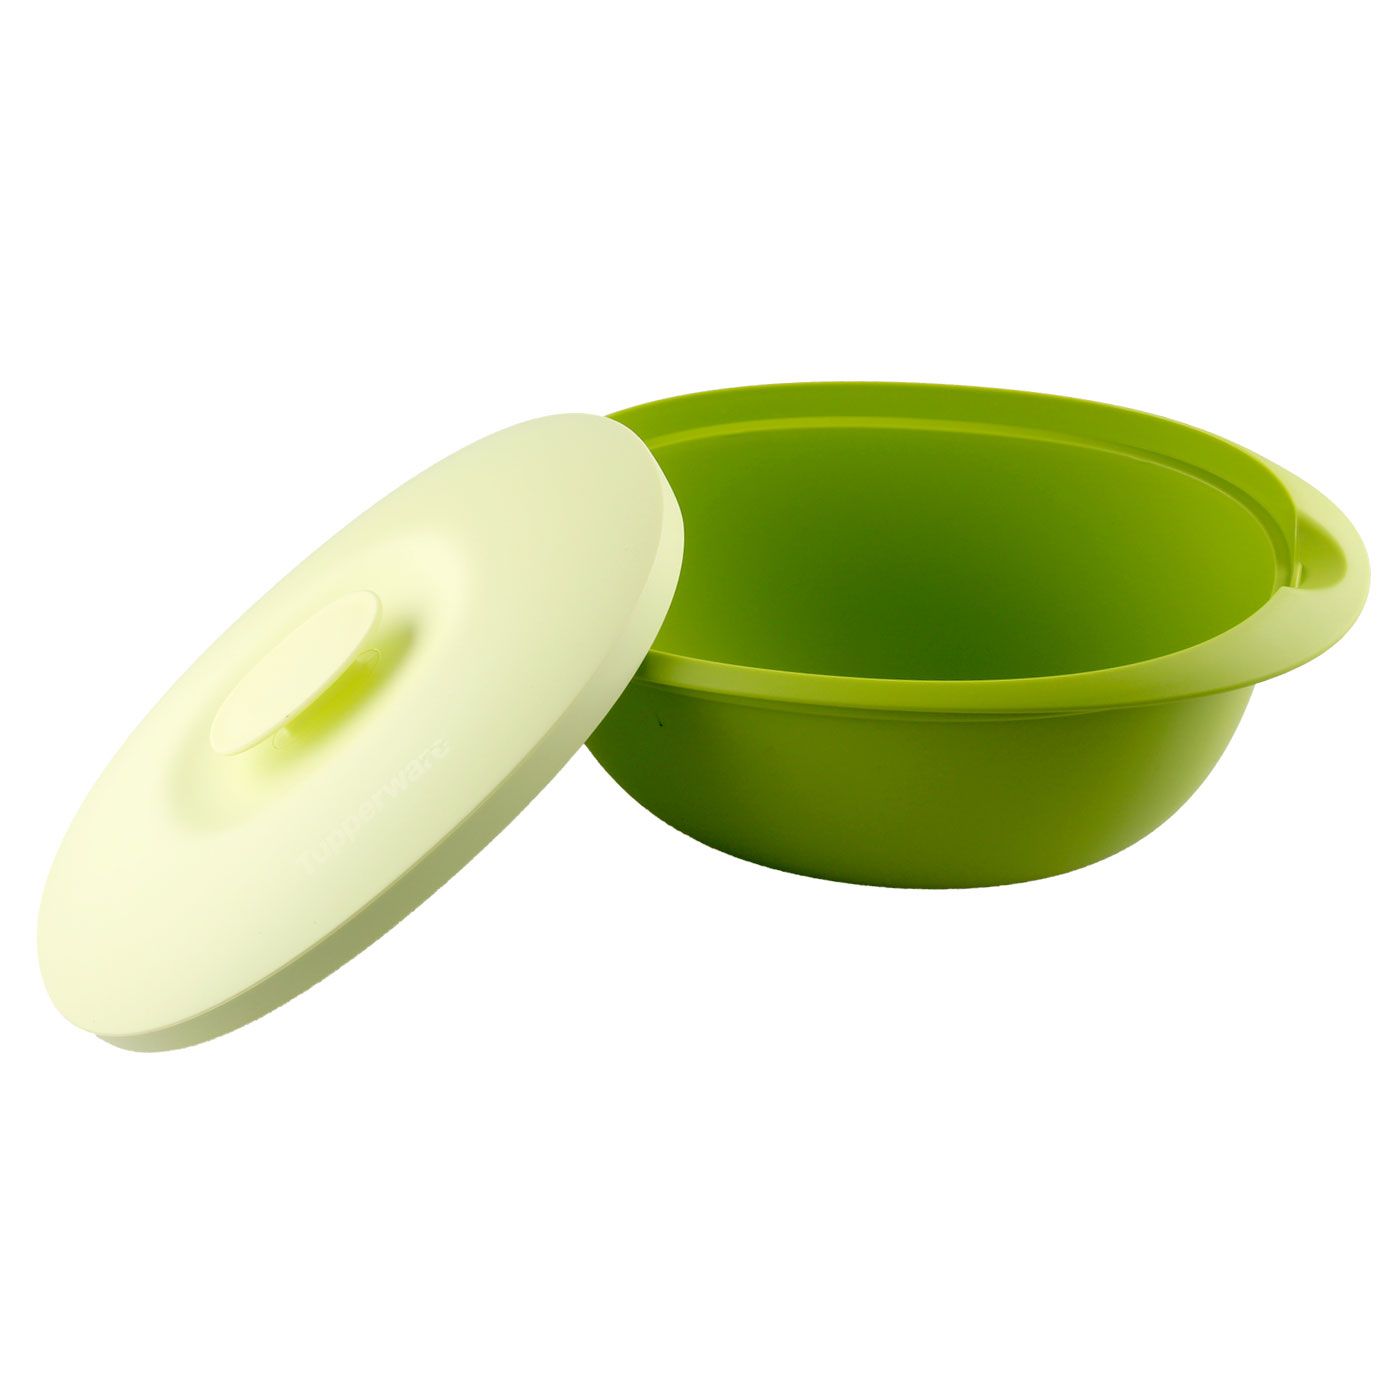 Tupperware Wadah Nasi Blossom Rice Server With Spoon - 2